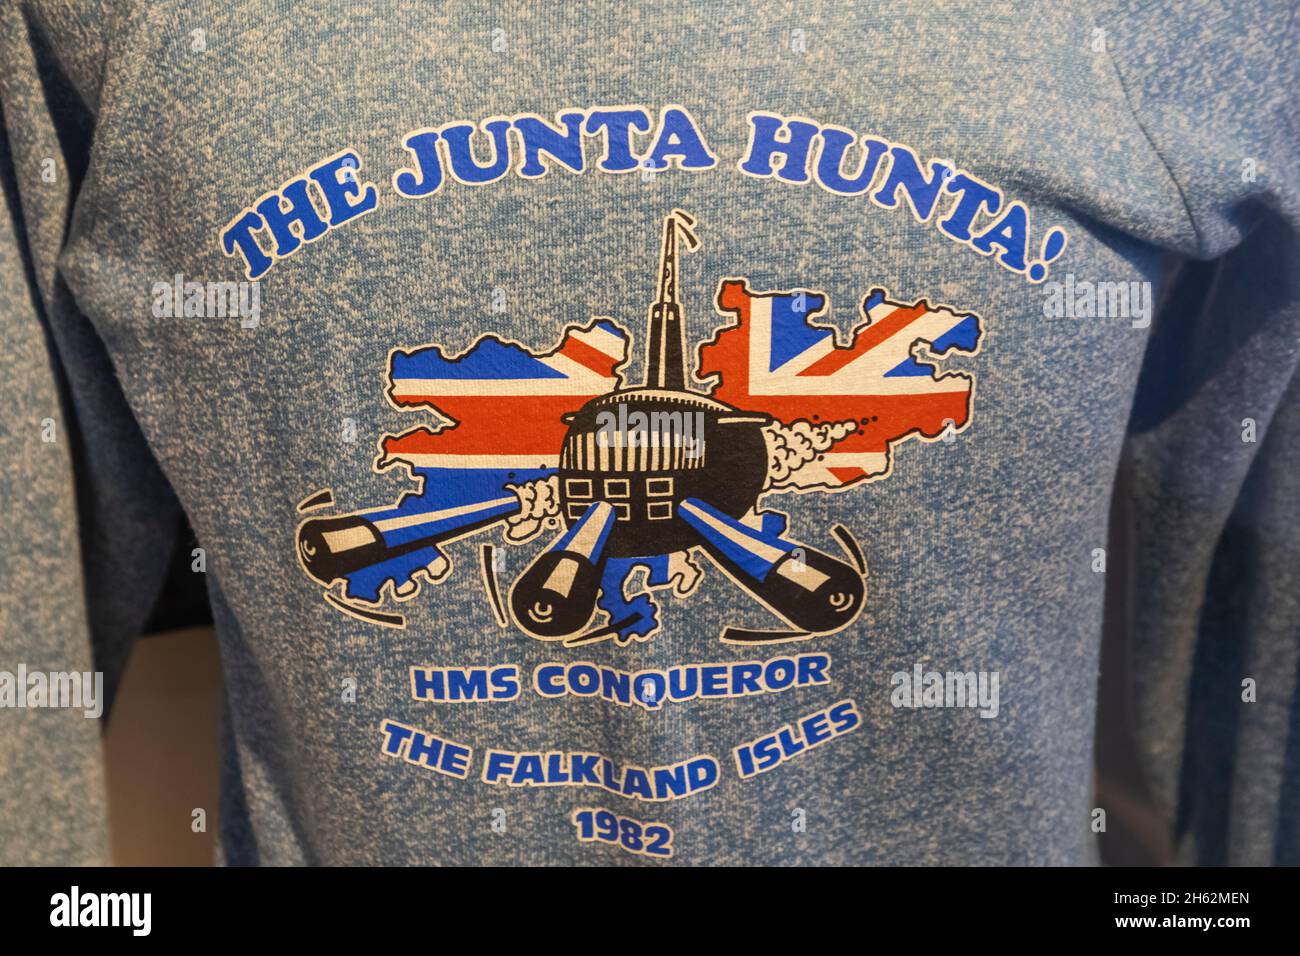 england,hampshire,portsmouth,gosport,portsmouth historic dockyard,submarine museum,souvenir junta hunta jumper from hms conqueror designed during the falkands war with argentina in 1982 Stock Photo